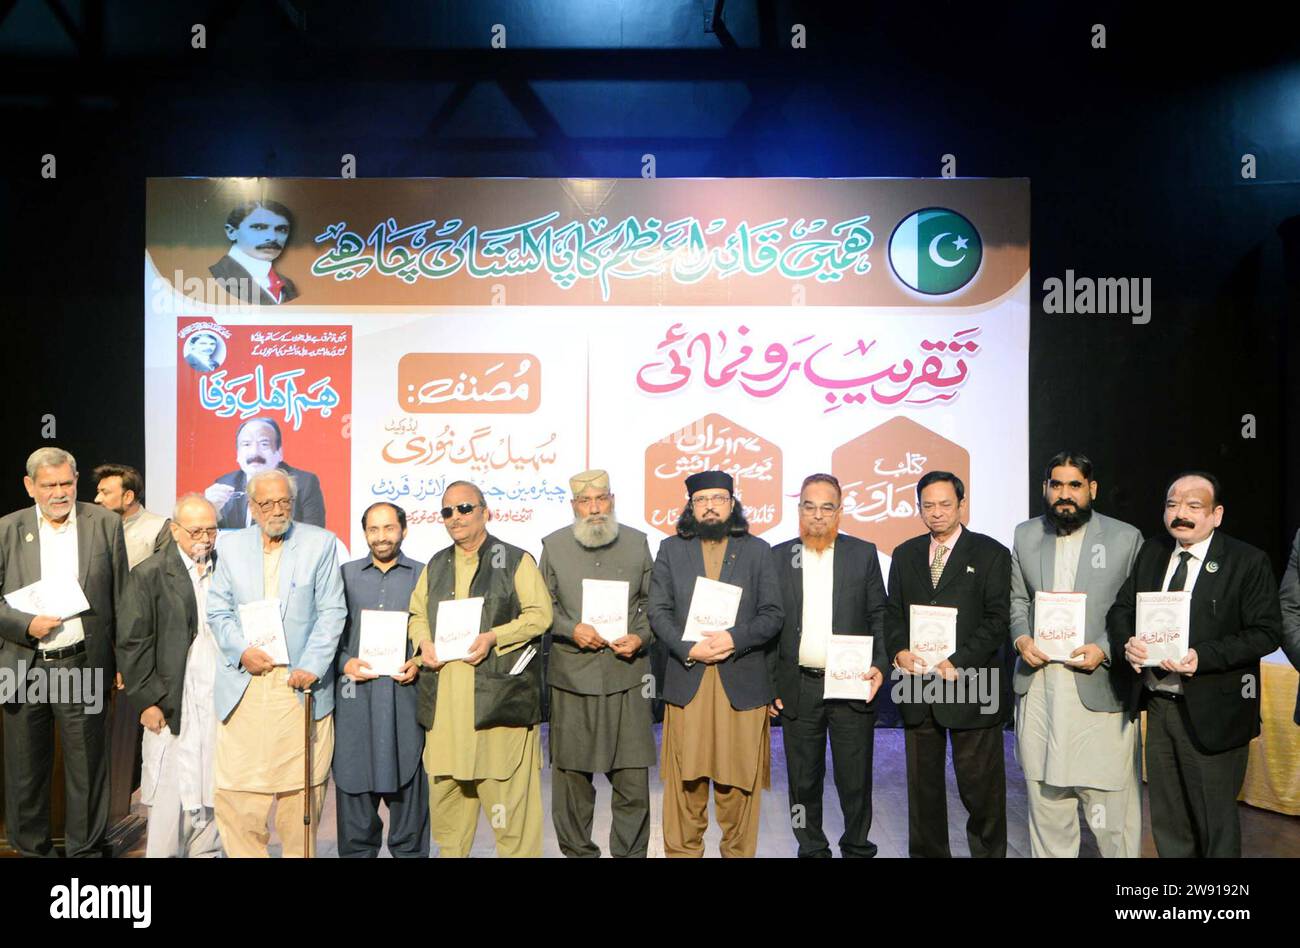 Advocate Sohail Beg Noori along with others in a group during the book unveiling ceremony of 'Hum Ahl-e-Wafa' in connection of the 147th birth anniversary of the founder of Pakistan, Quaid-e-Azam Muhammad Ali Jinnah, held at Art Council building in Karachi on Saturday, December 23, 2023. Stock Photo